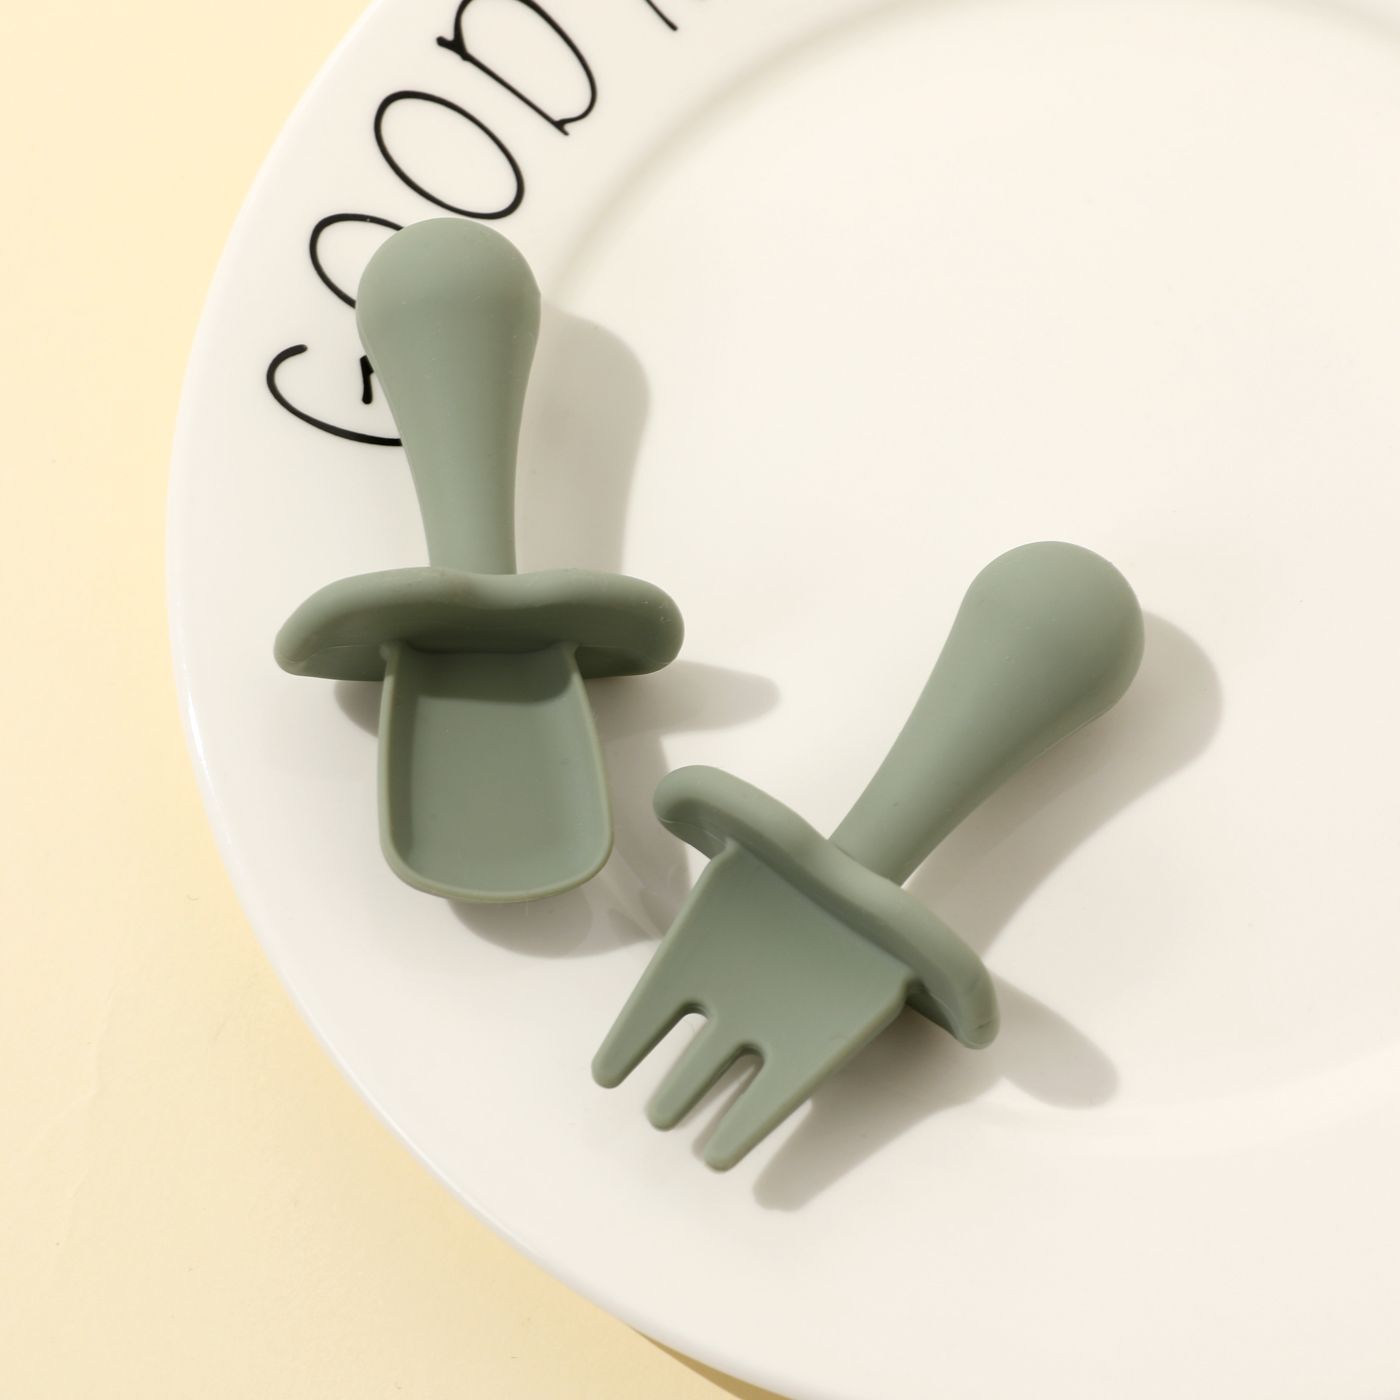 Silicone Baby Feeding Set Includes Spoons & Forks Infant Newborn Utensil Set For Self-Training